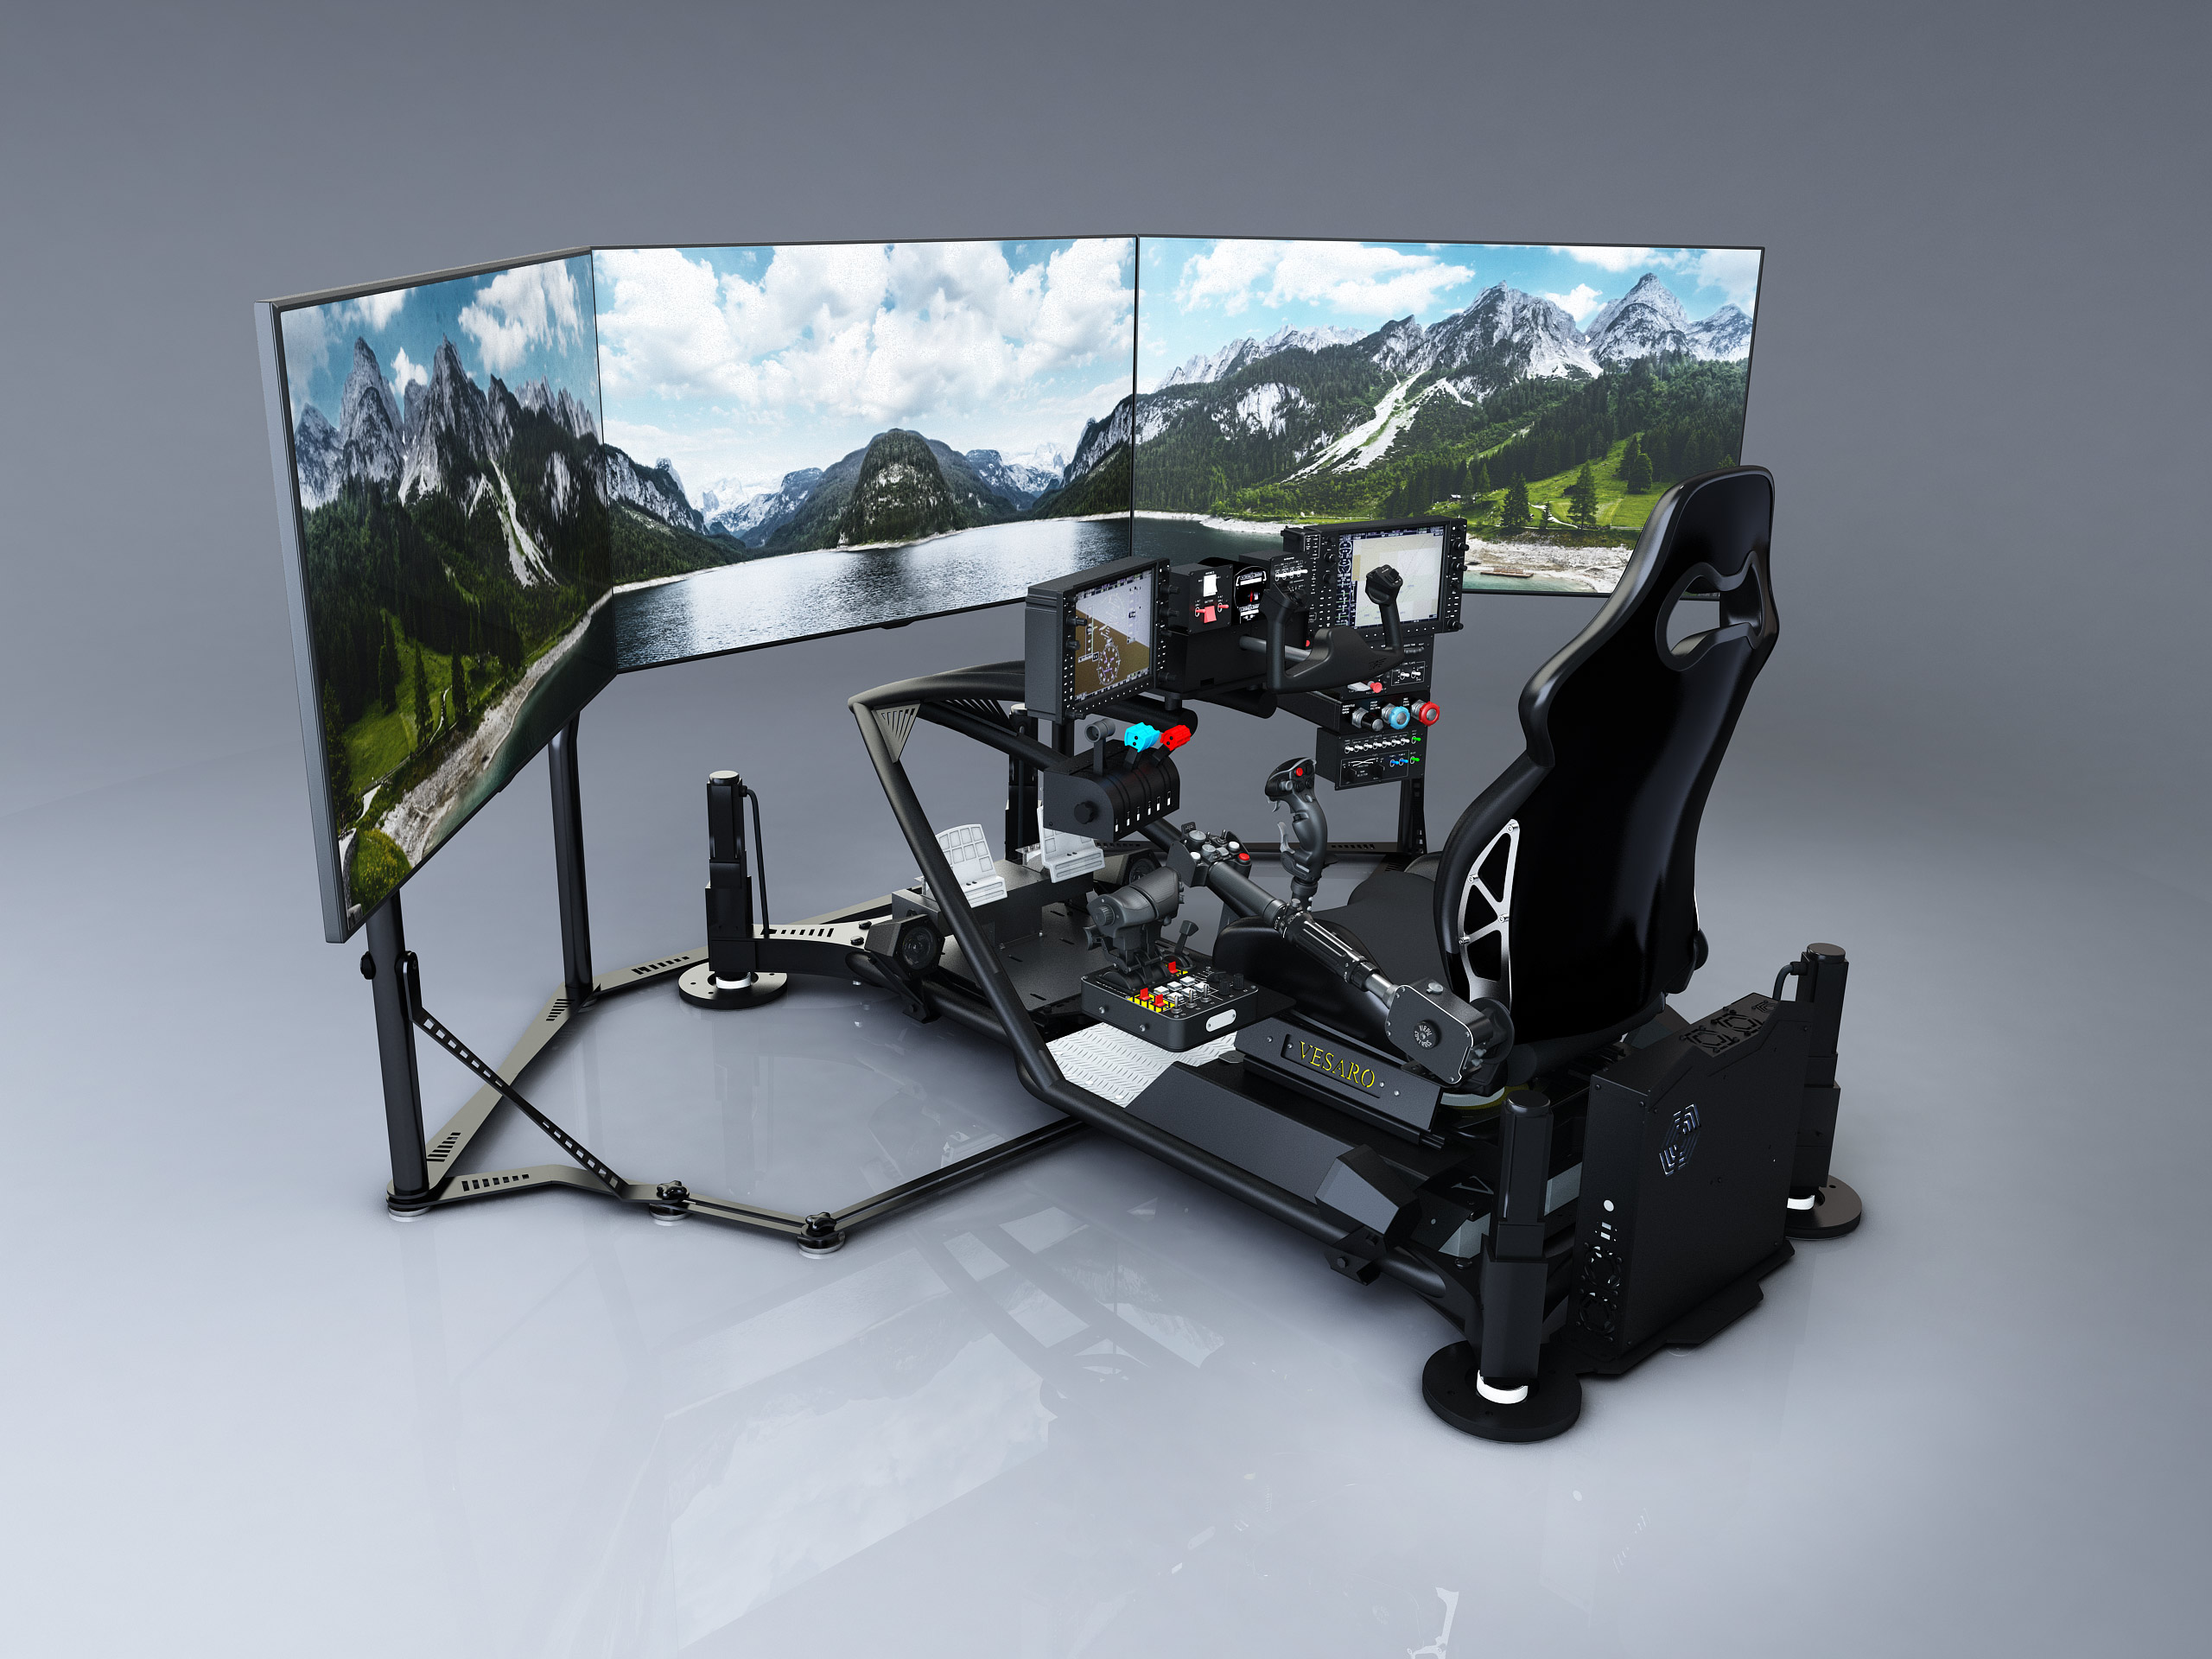 Who has room in their house for this Flight Sim turbine PC case